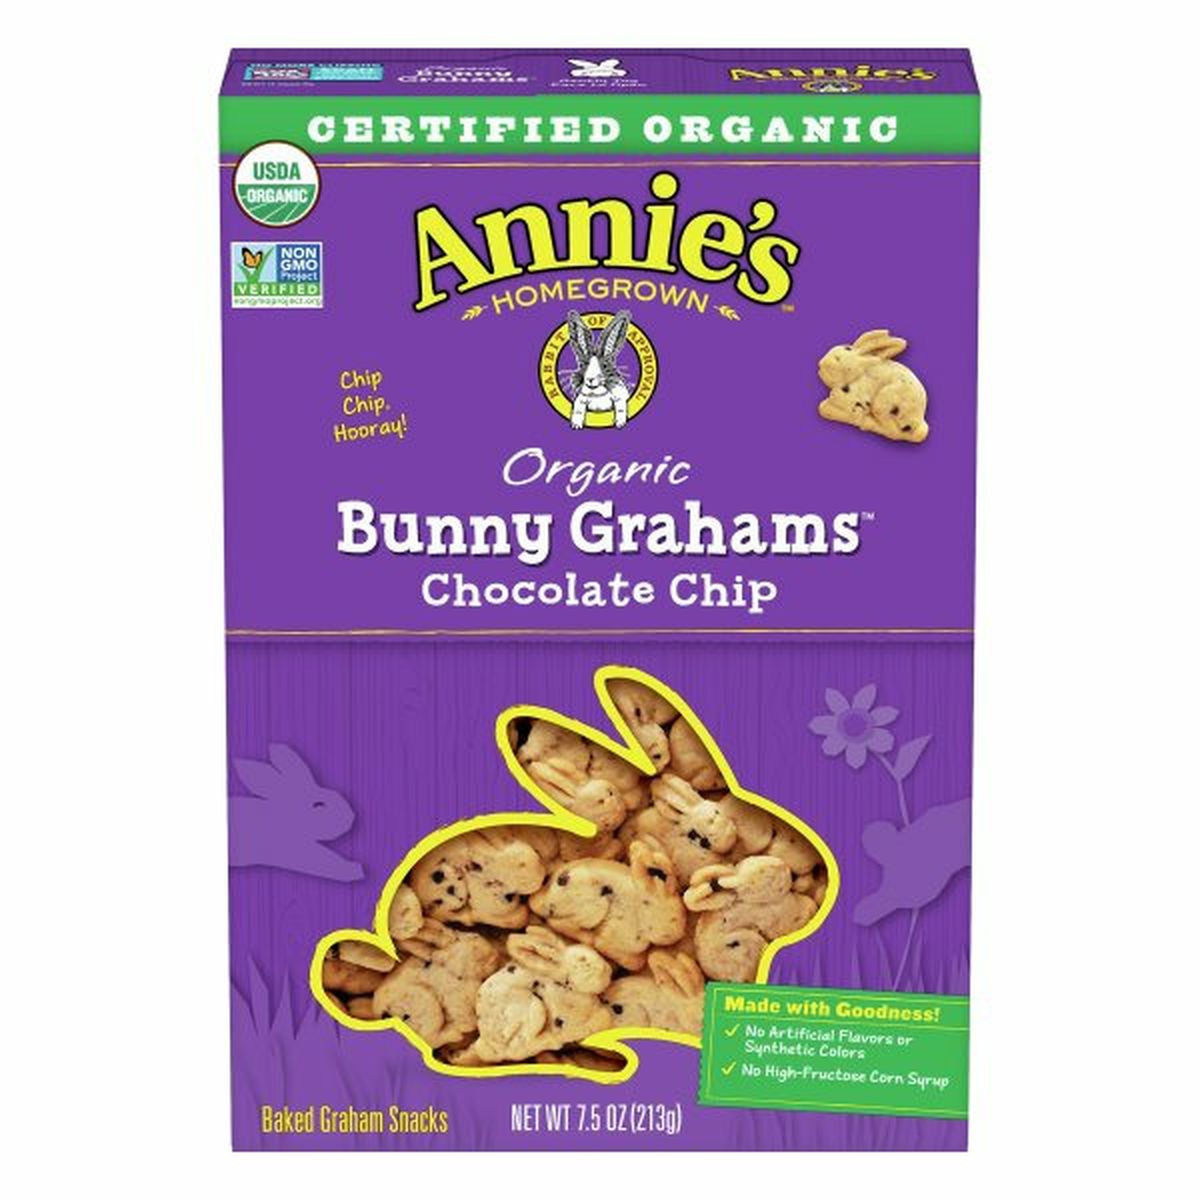 Calories in Annie's Bunny Grahams, Organic, Chocolate Chip